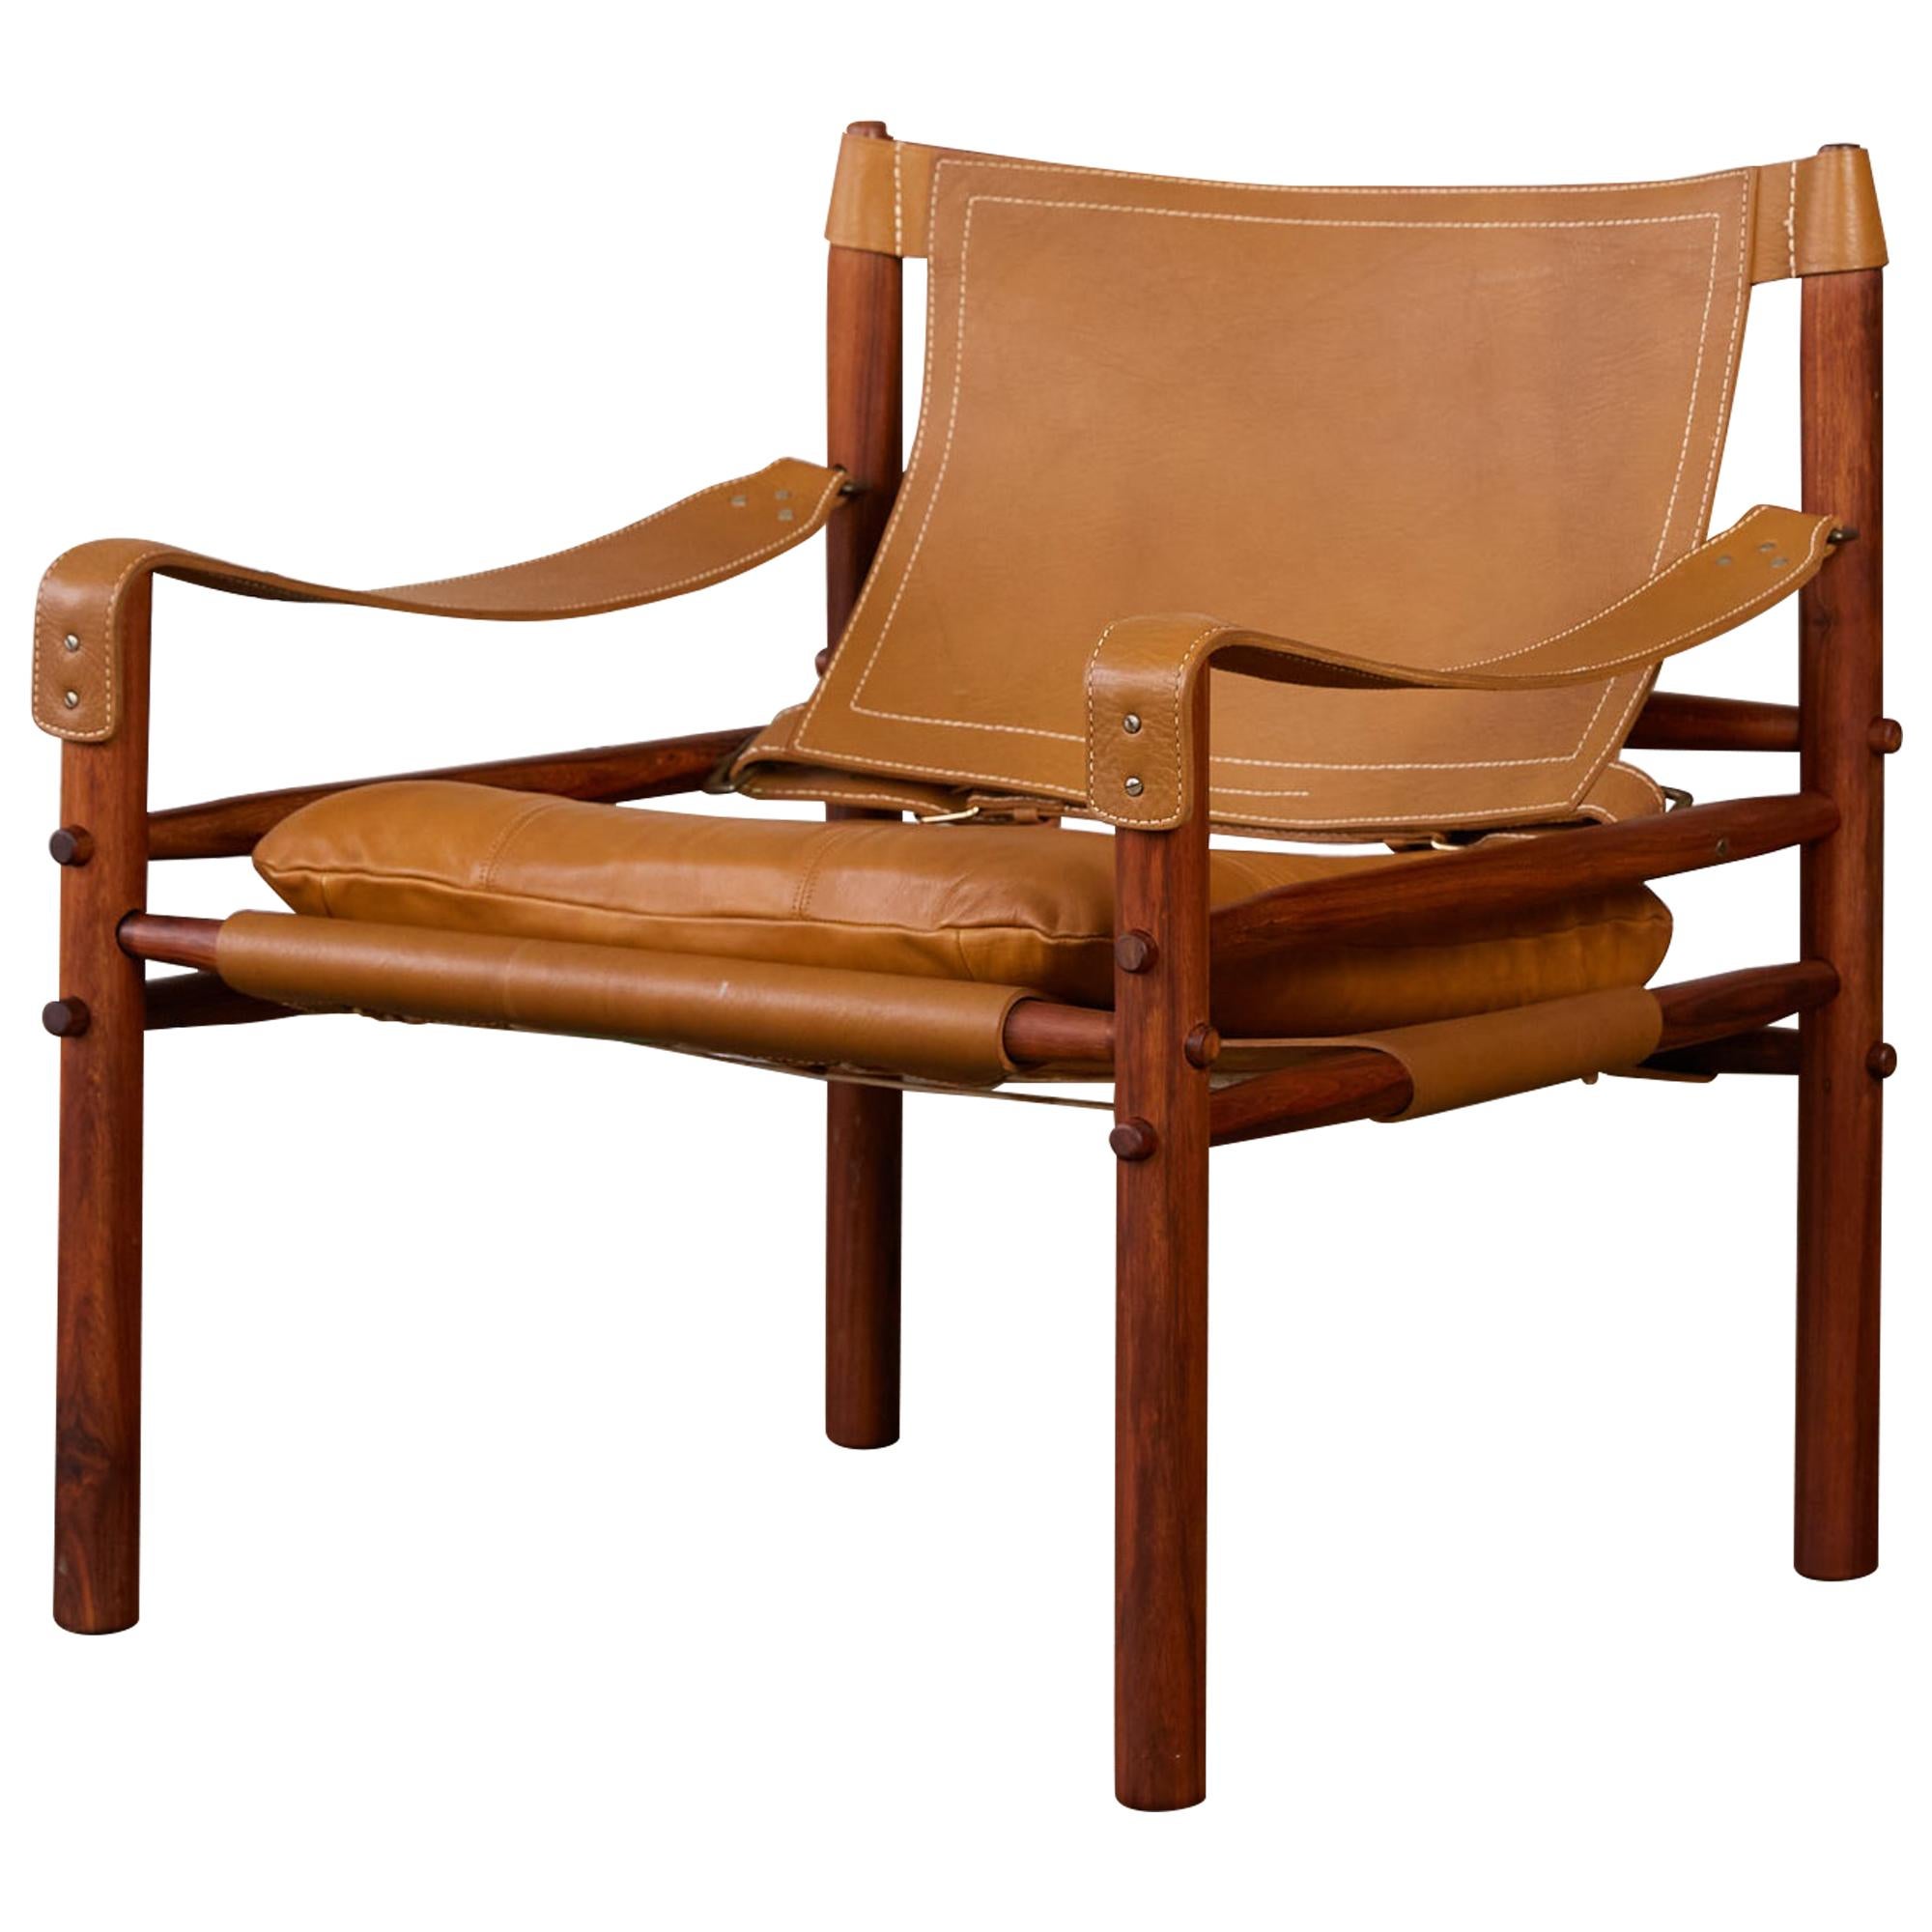 “Sirocco” Safari Lounge Chair by Arne Norell